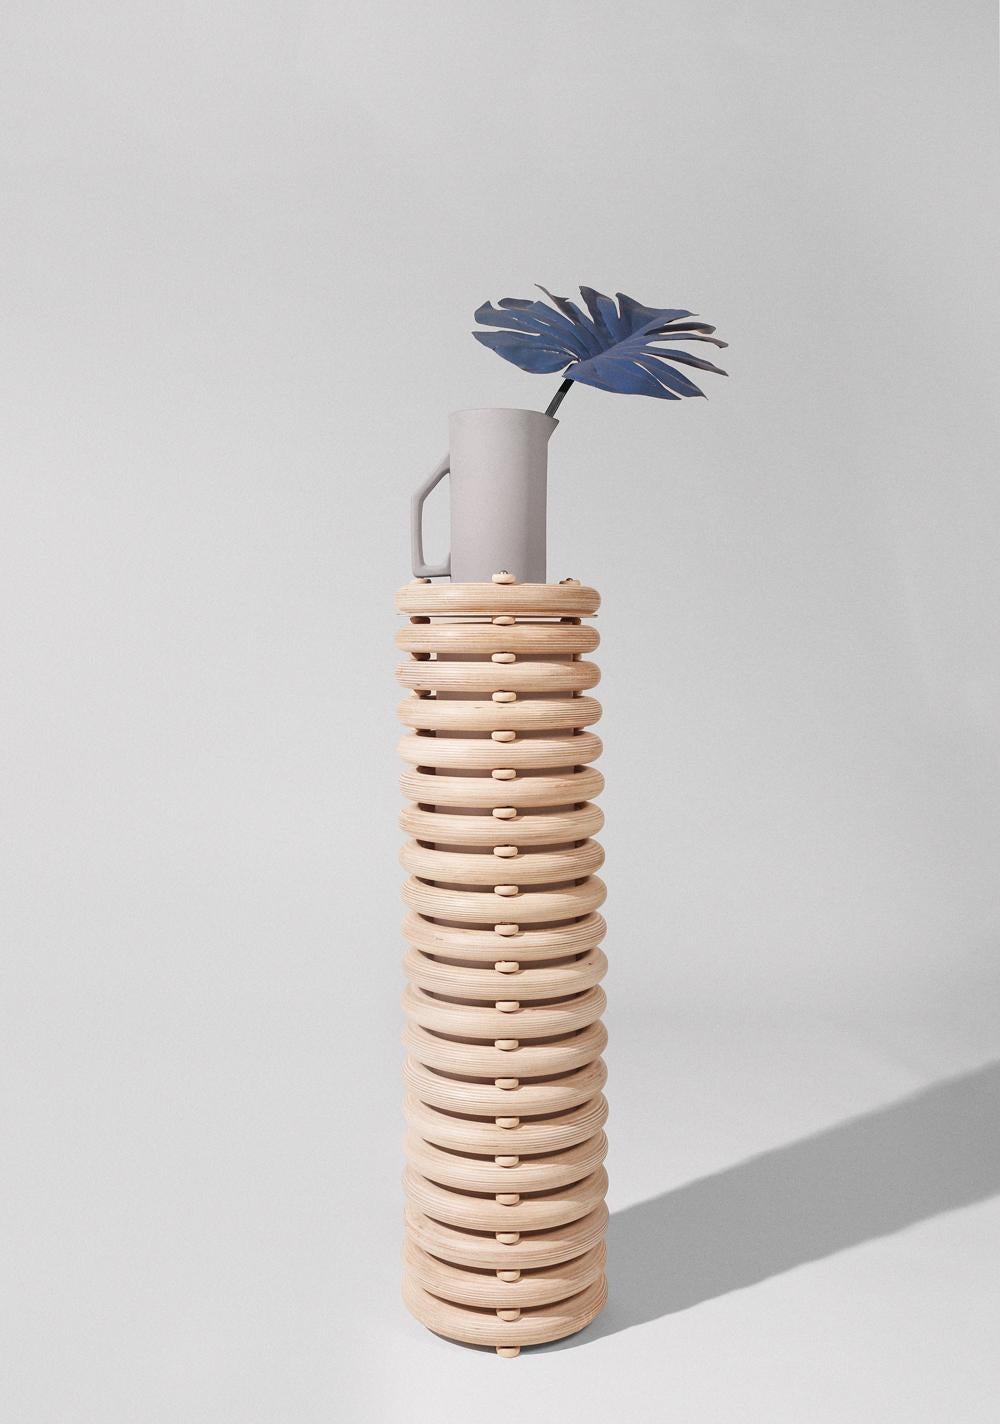 Made to order. Please allow six weeks for production.

The Echo family of sculptural totems pairs tropical warmth with Minimalist appeal. Made of stacked finely finished birch, the totems have an architectural rigidity and a soft visual appeal.